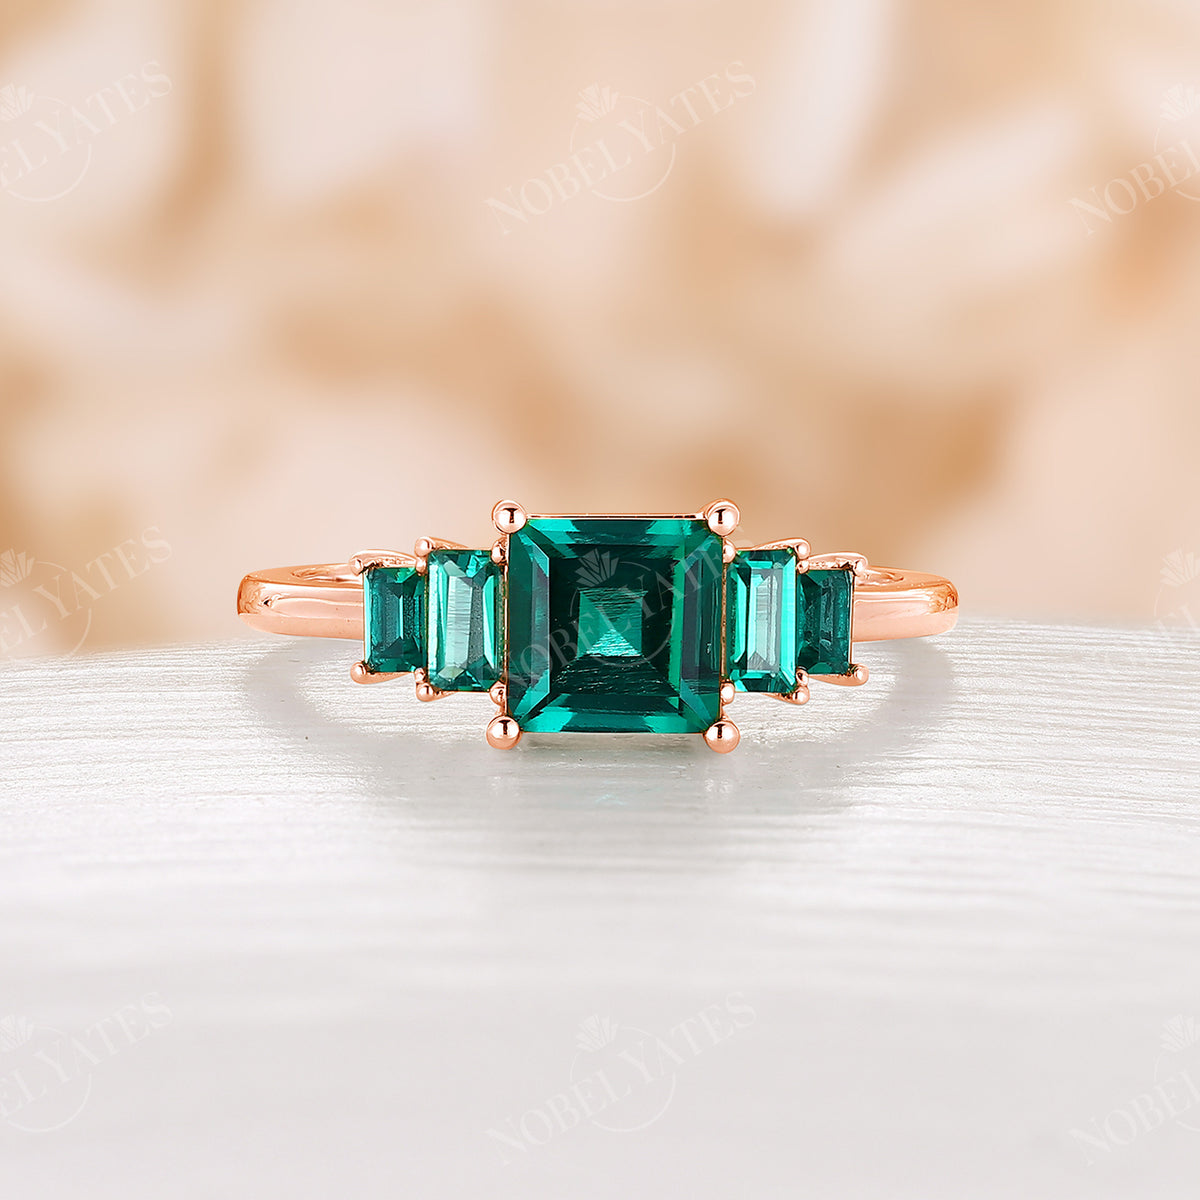 All Emerald Engagement Ring Princess Cut Side Stones RIng